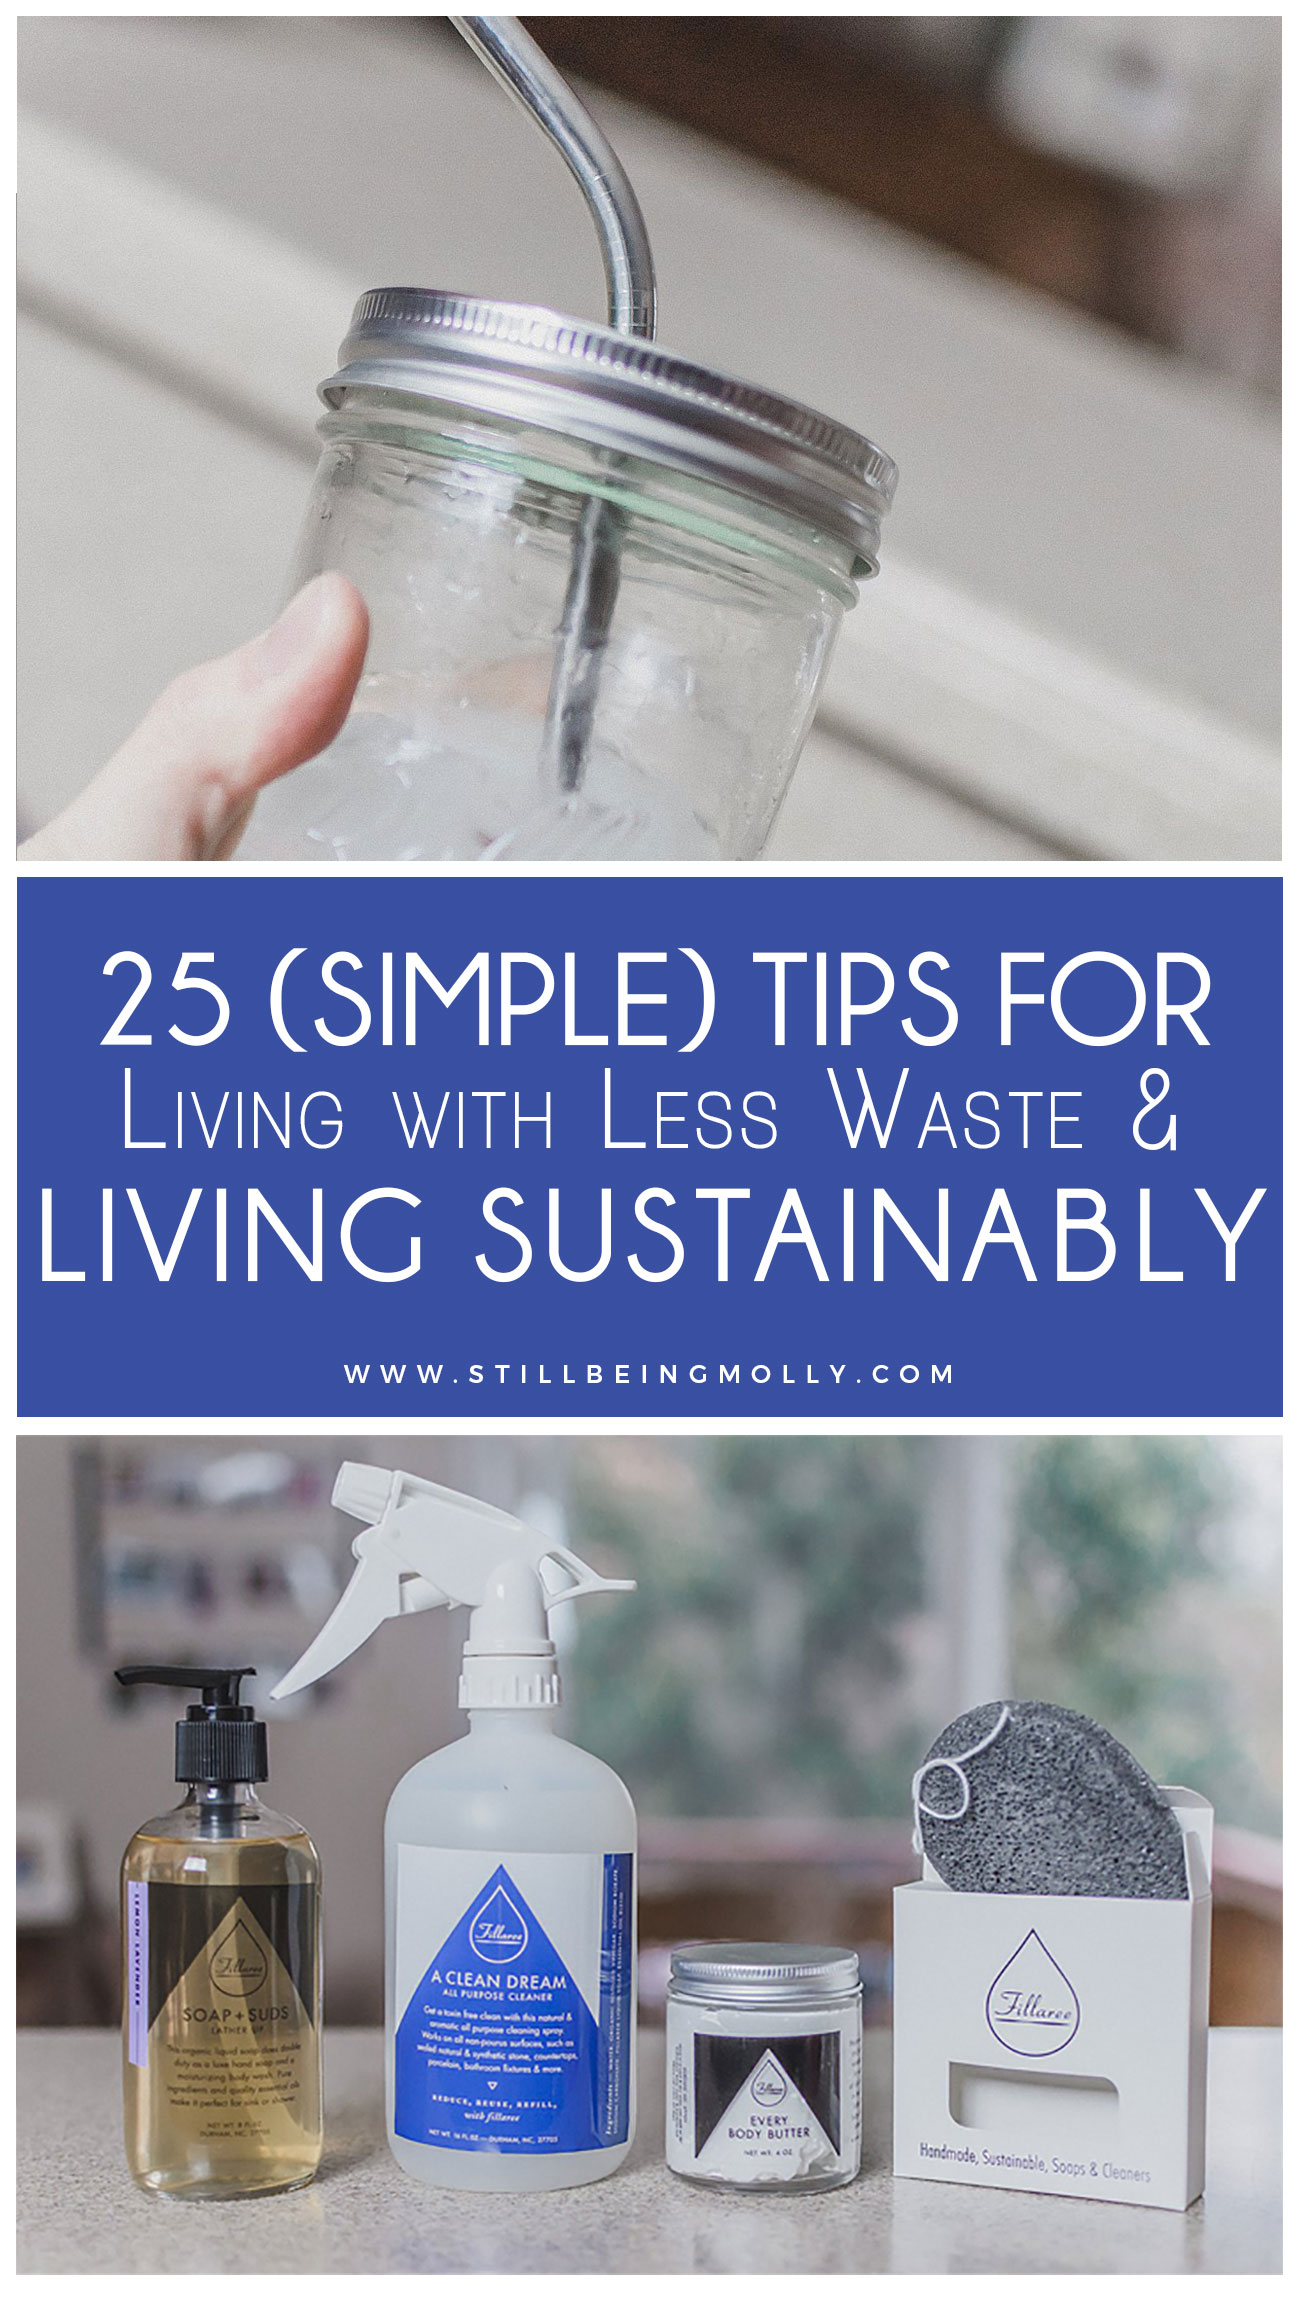 25 Simple Tips for Living With Less Waste and Living More Sustainably by popular North Carolina ethical blogger Still Being Molly